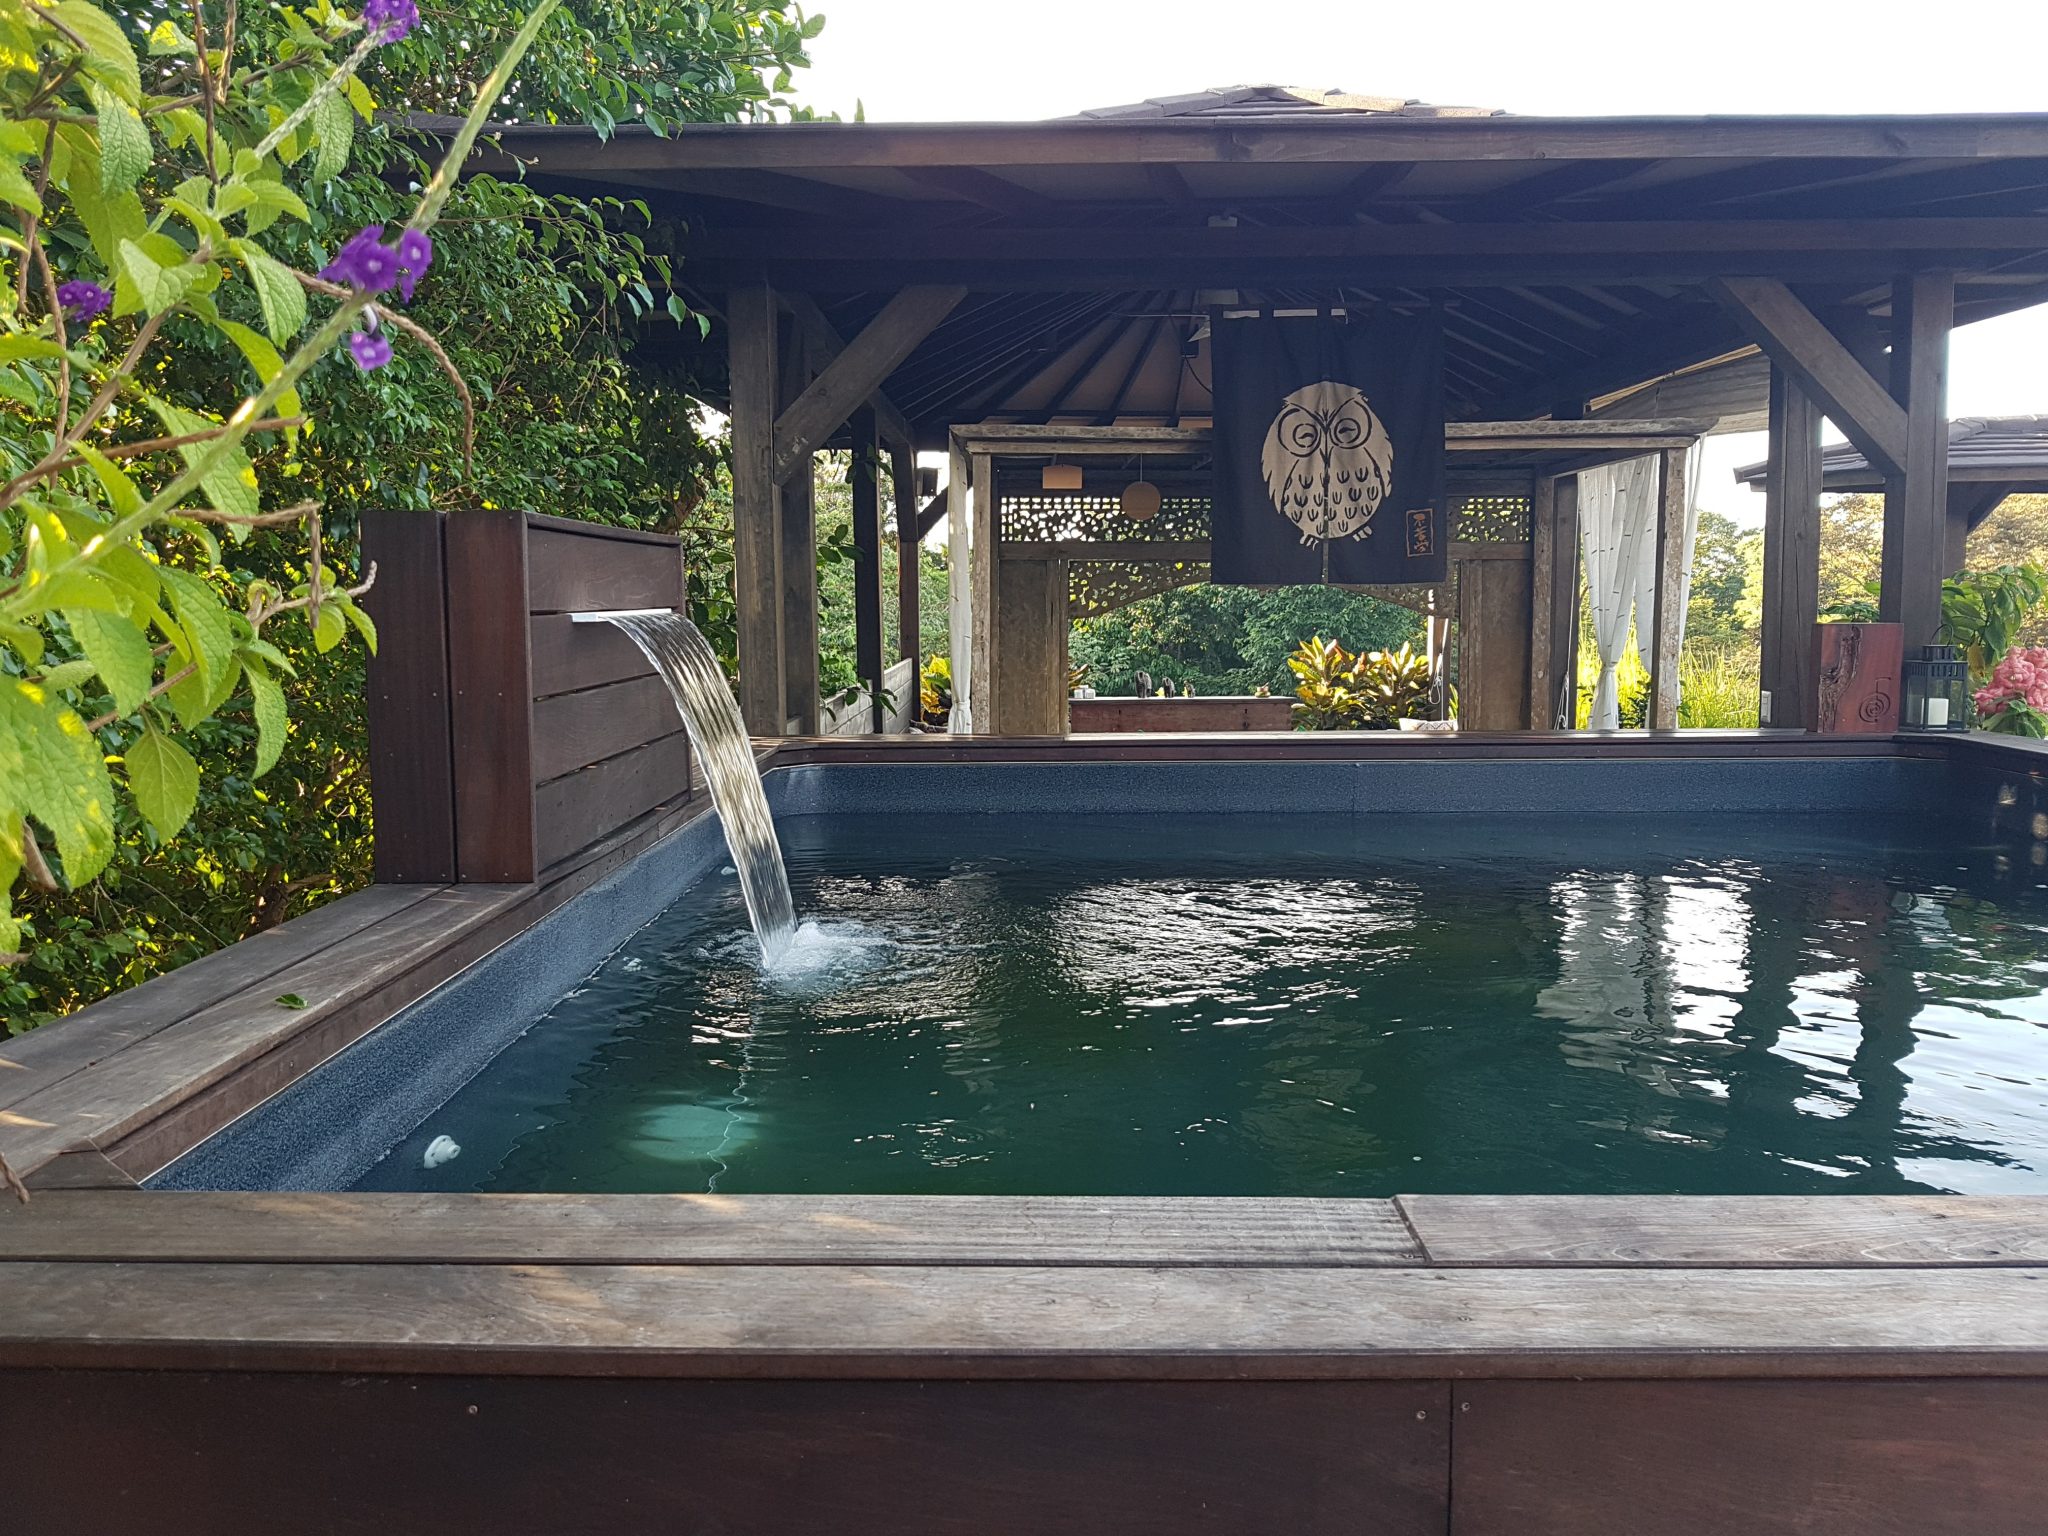 0.1 ACRES - 3 Bedroom Bali Style Home With Rooftop Pool In Convenient Location!!!